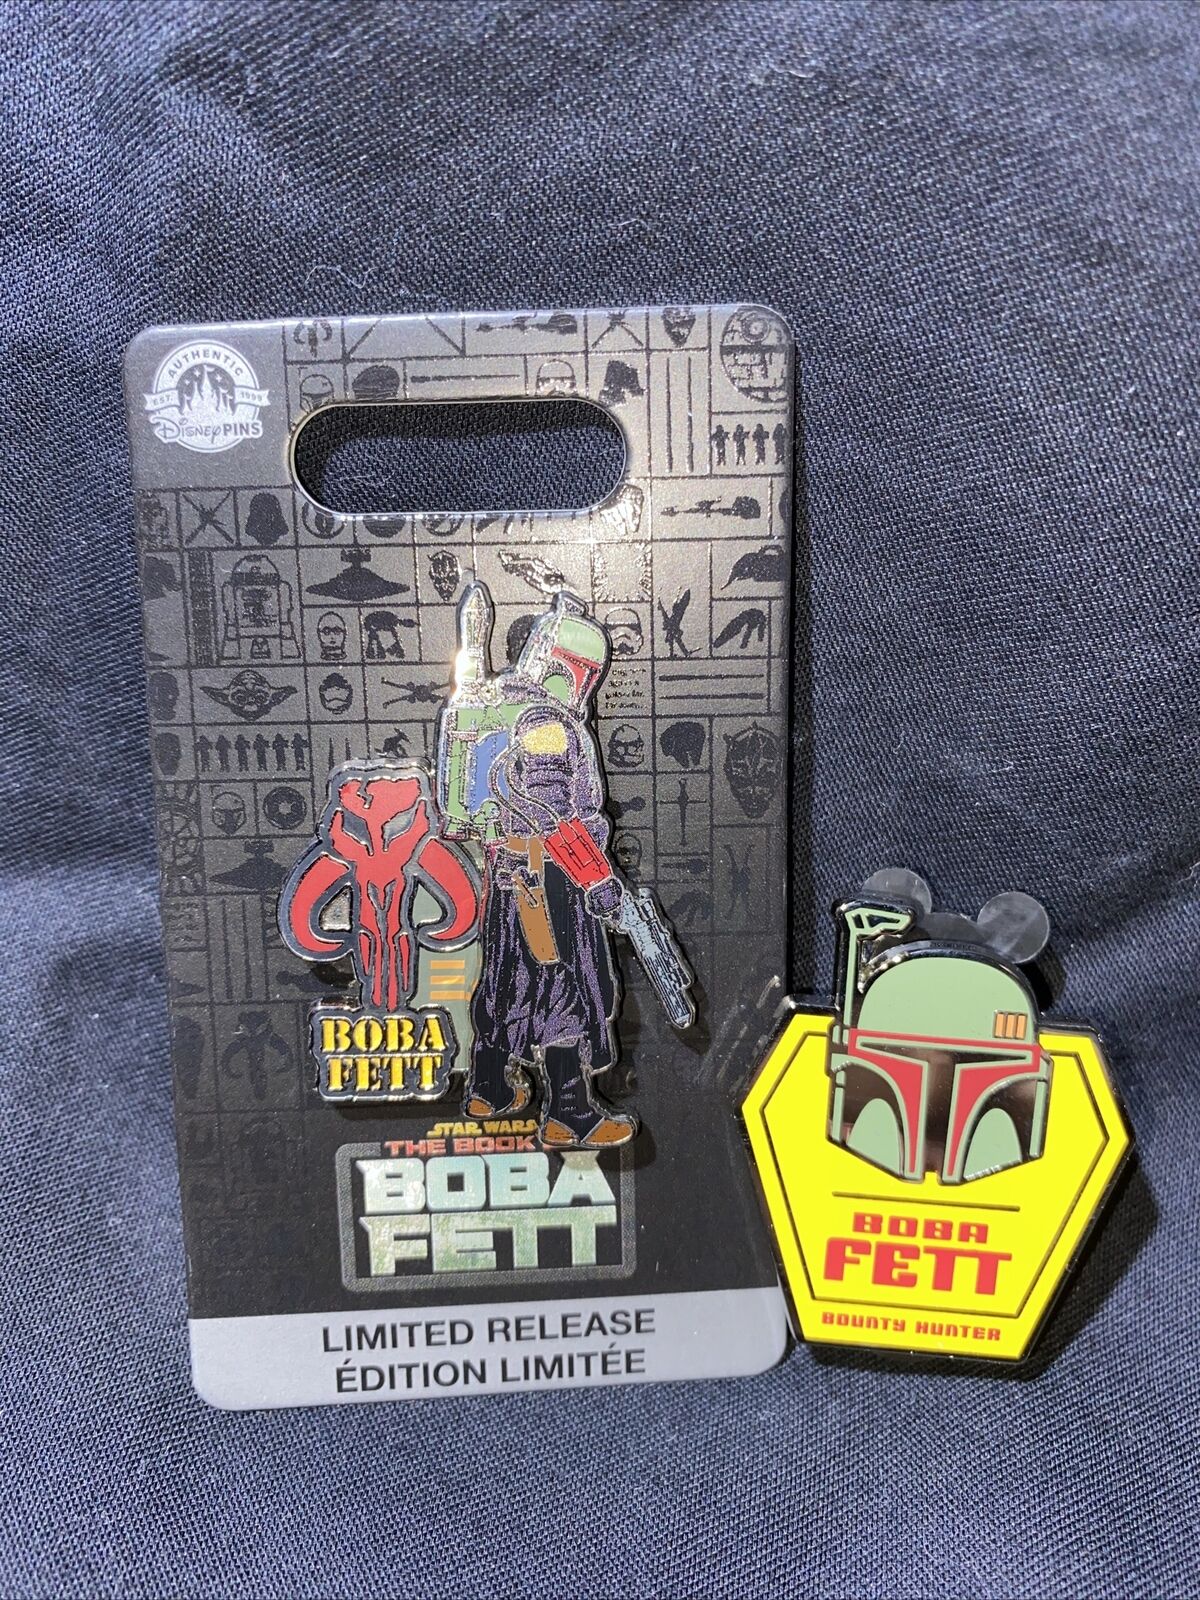 Disney Limited Edition Pins Star Wars The Book of Boba Fett set of Two Pins